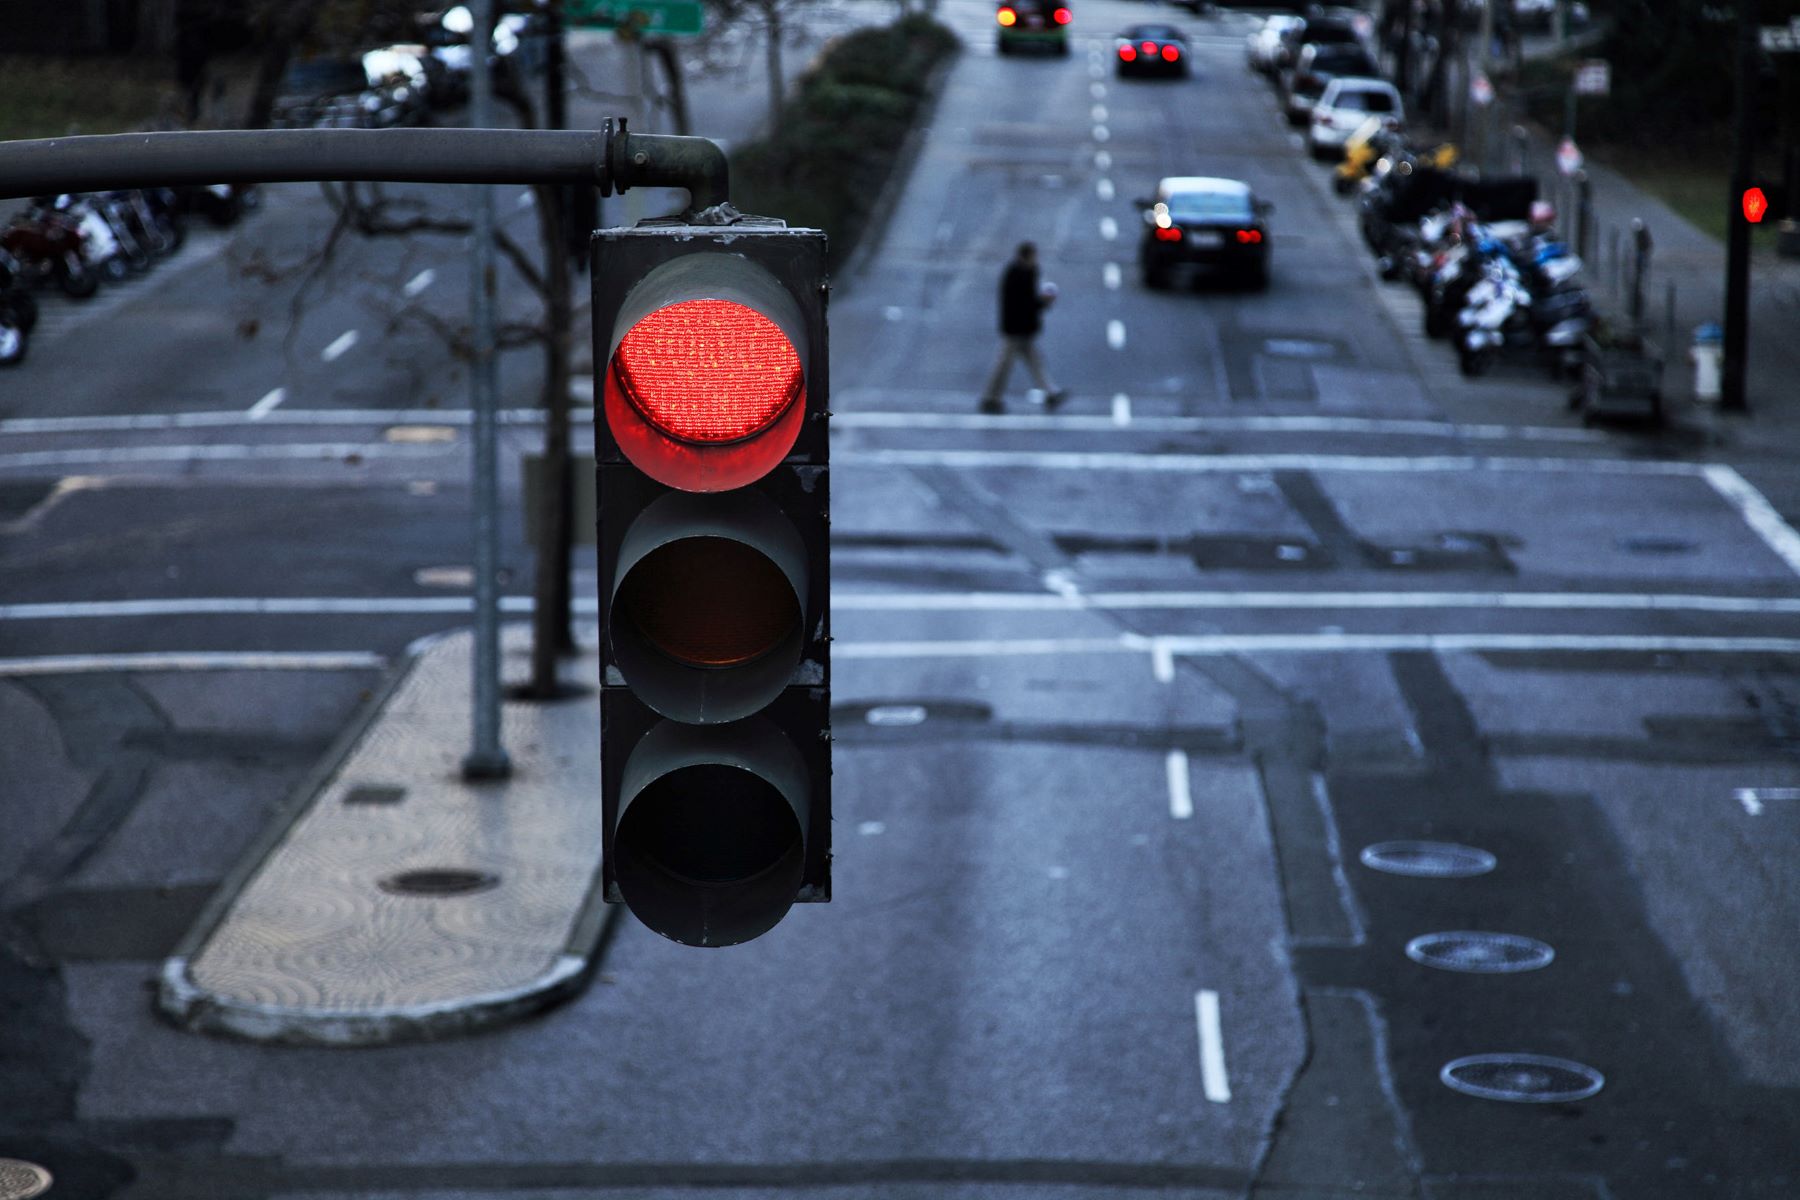 The Surprising Rule You Didn't Know About Making Right Turns On Red